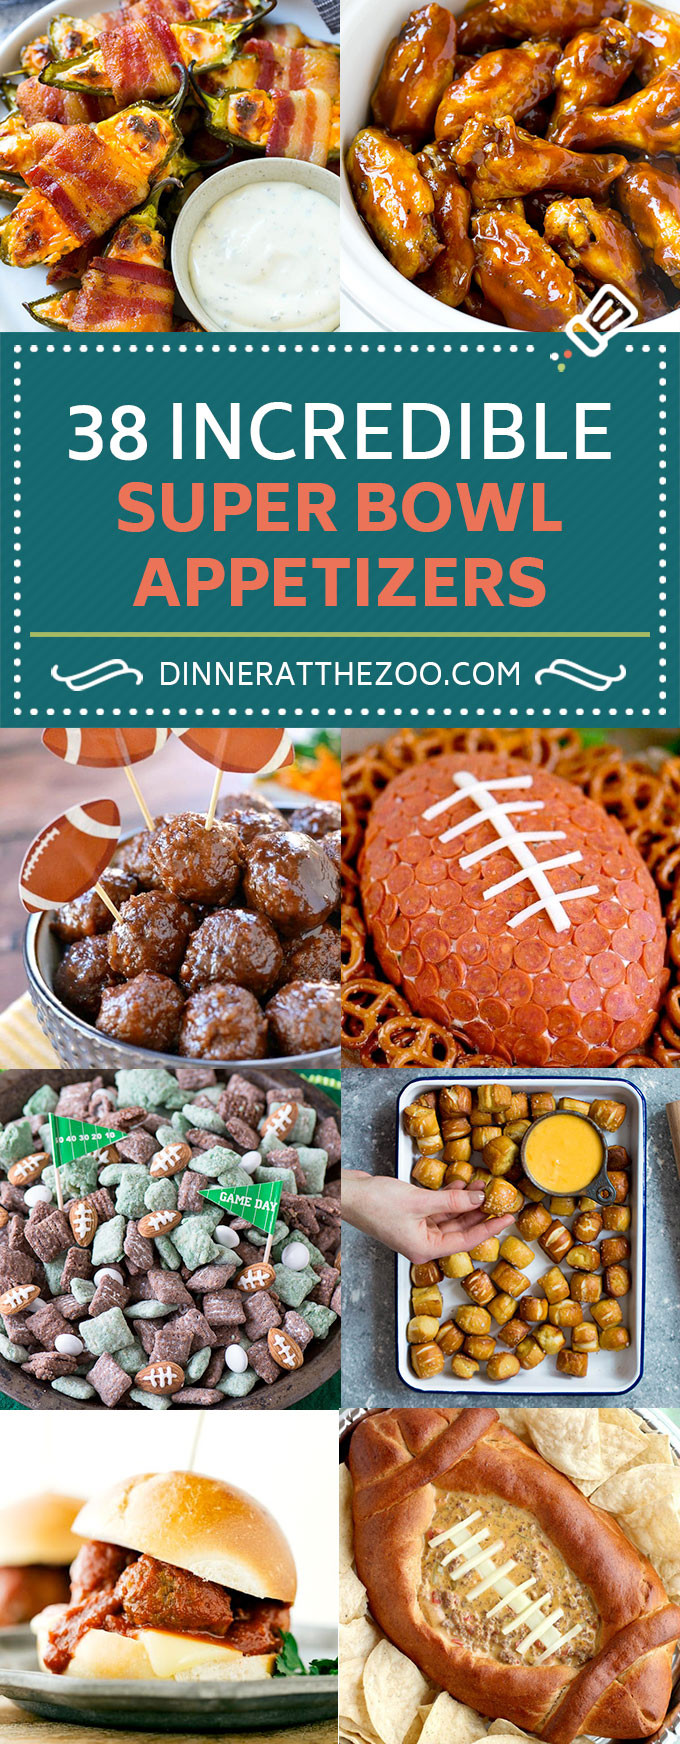 Recipes For Super Bowl
 45 Incredible Super Bowl Appetizer Recipes Dinner at the Zoo